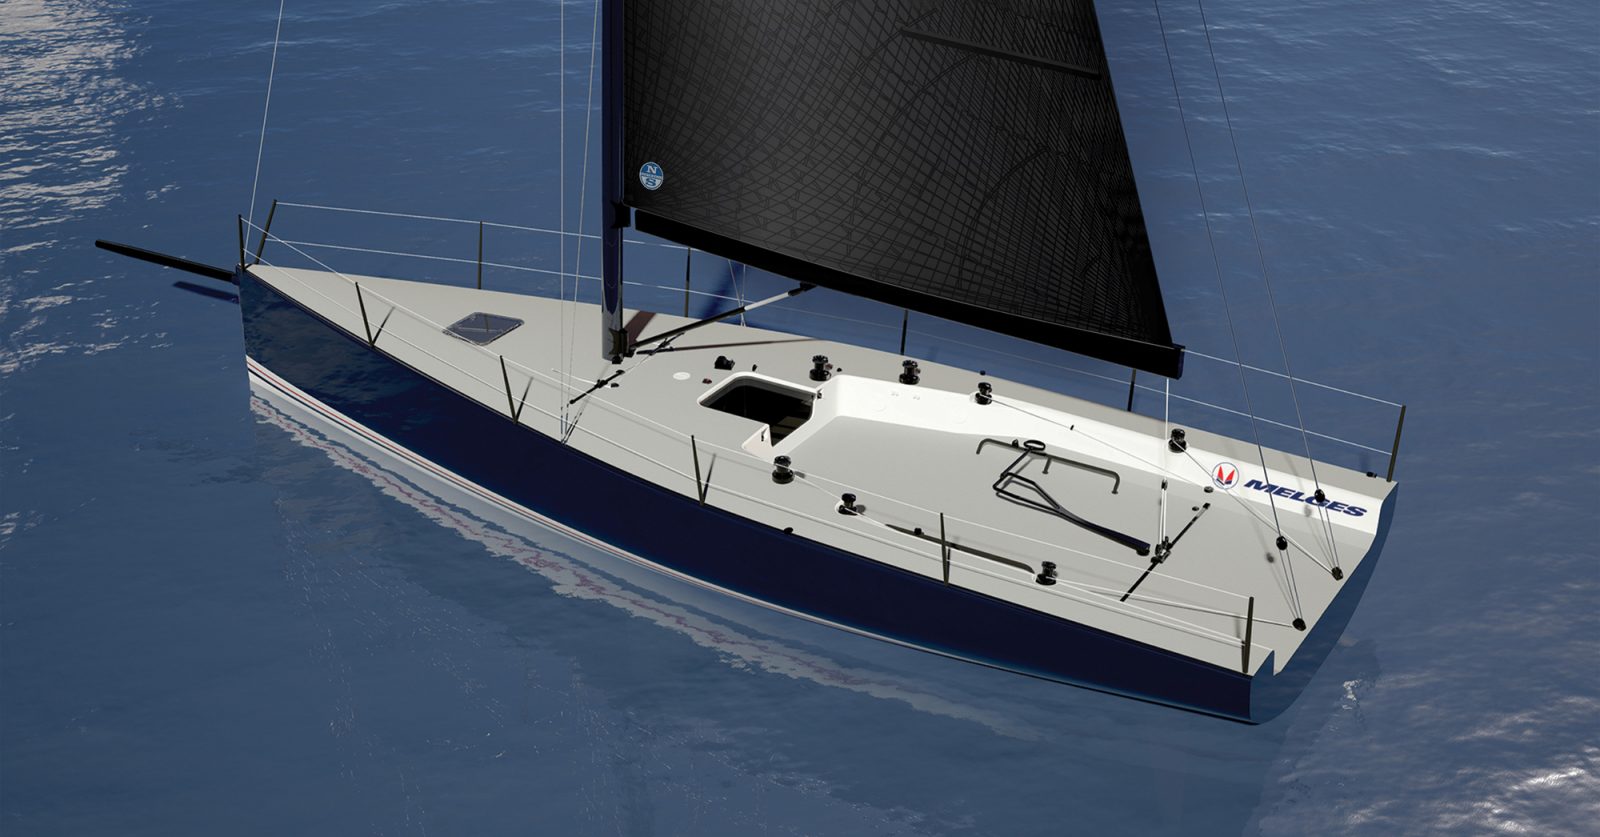 NORTH SAILS DESIGNS INVENTORY FOR NEW MELGES IC37 CLASS